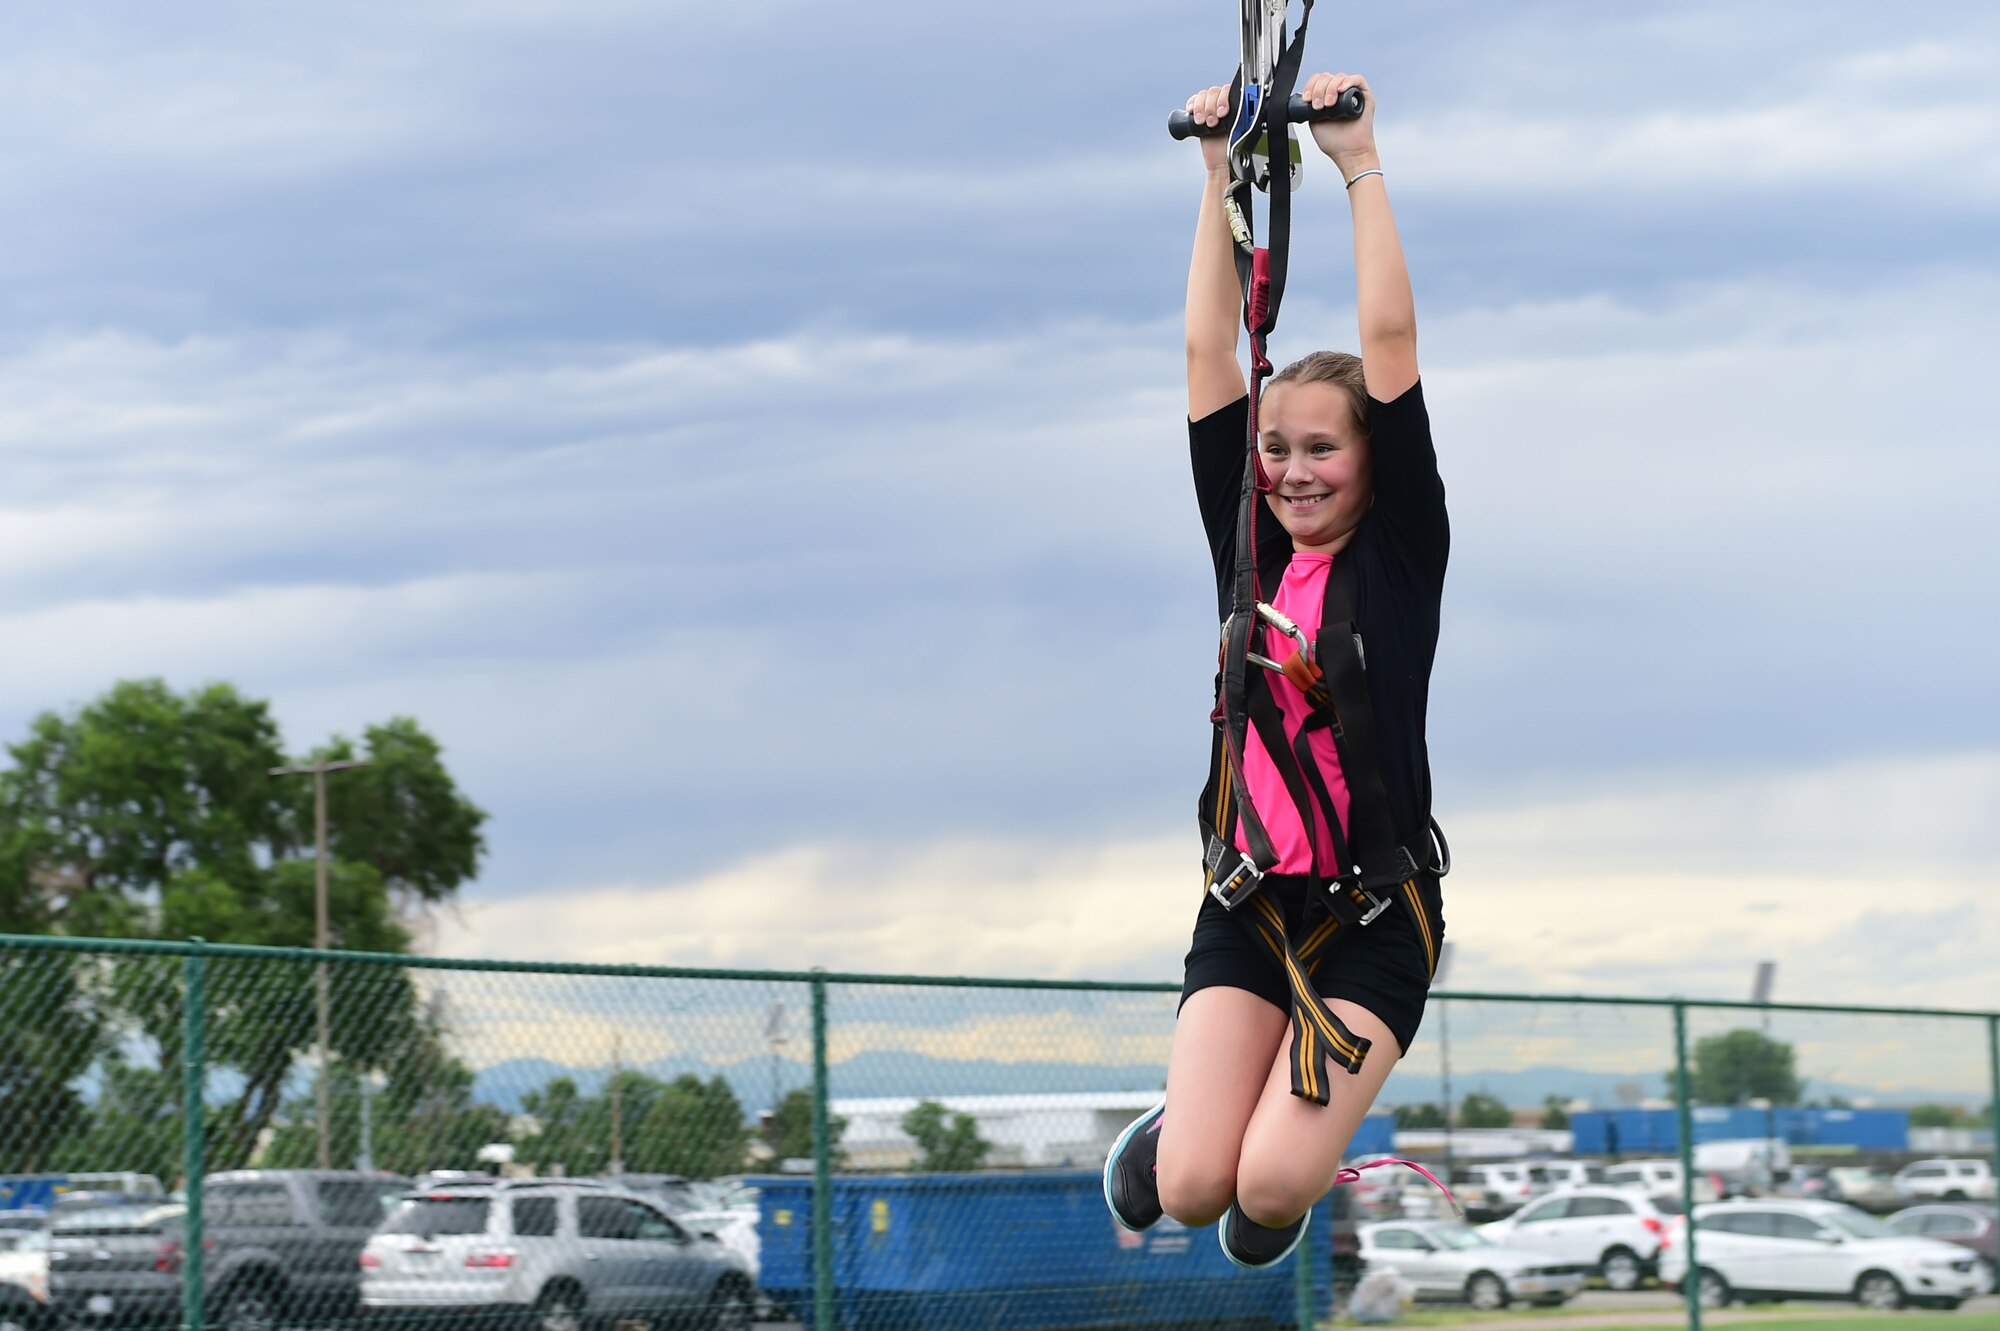 A child from Team Buckley glides down a zip line during FunFest July 24, 2015, at Buckley Air Force Base, Colo. FunFest is an annual base-wide event that includes family-friendly games and activities, community involvement and local business sponsors. (U.S. Air Force photo by Airman 1st Class Luke W. Nowakowski/Released)